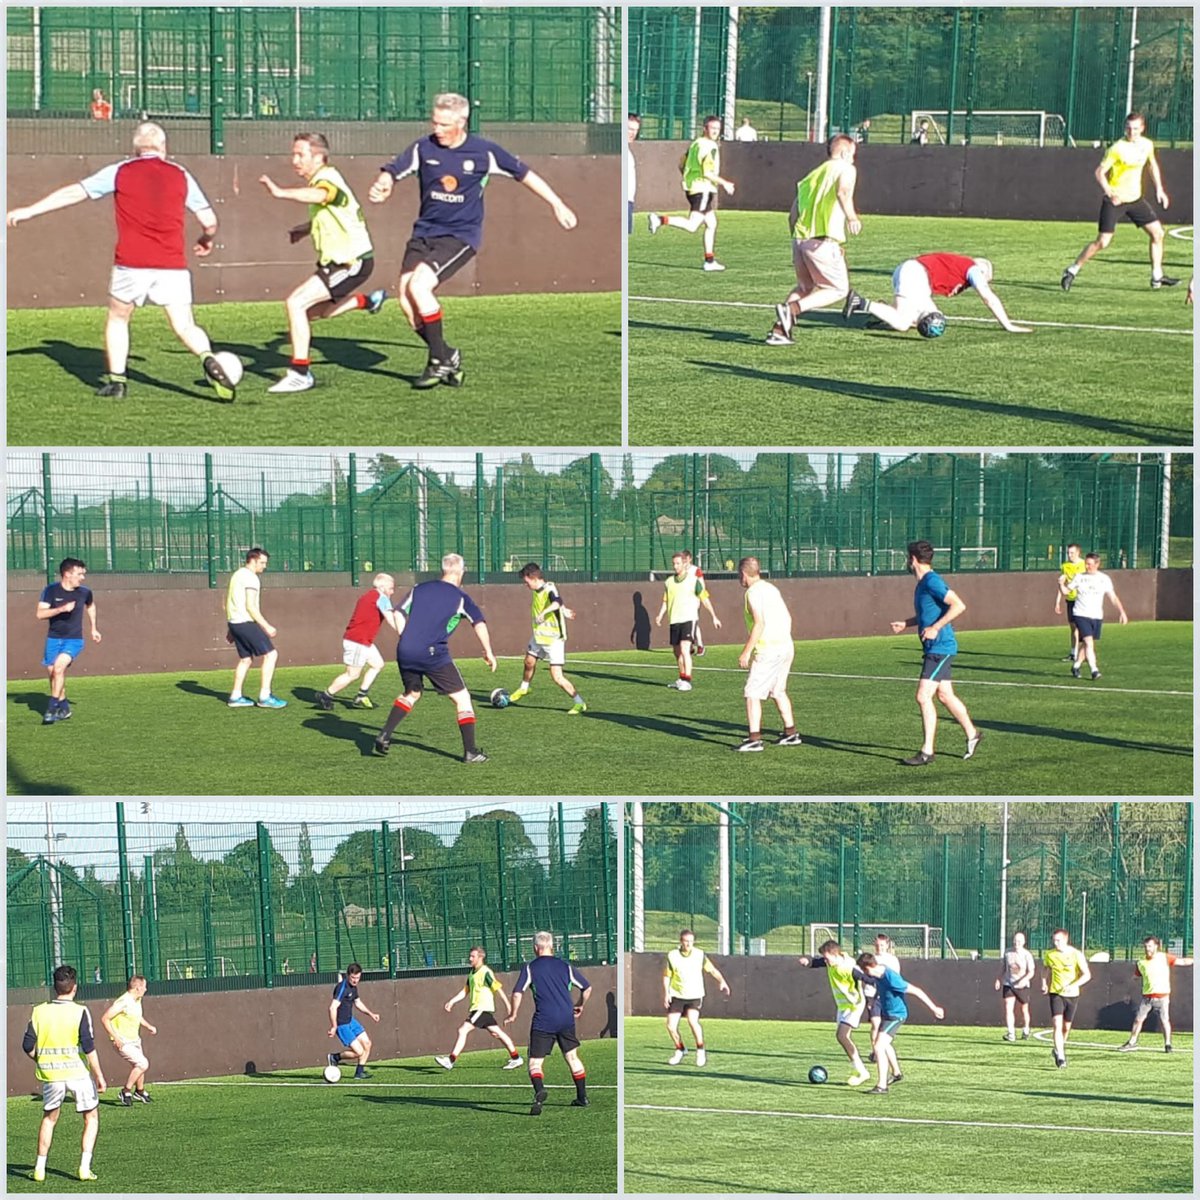 @HBSEstatesCOH and HBS Estates Swords kick started their #HSEStepsChallenge with some healthy competition on the football pitch this evening!